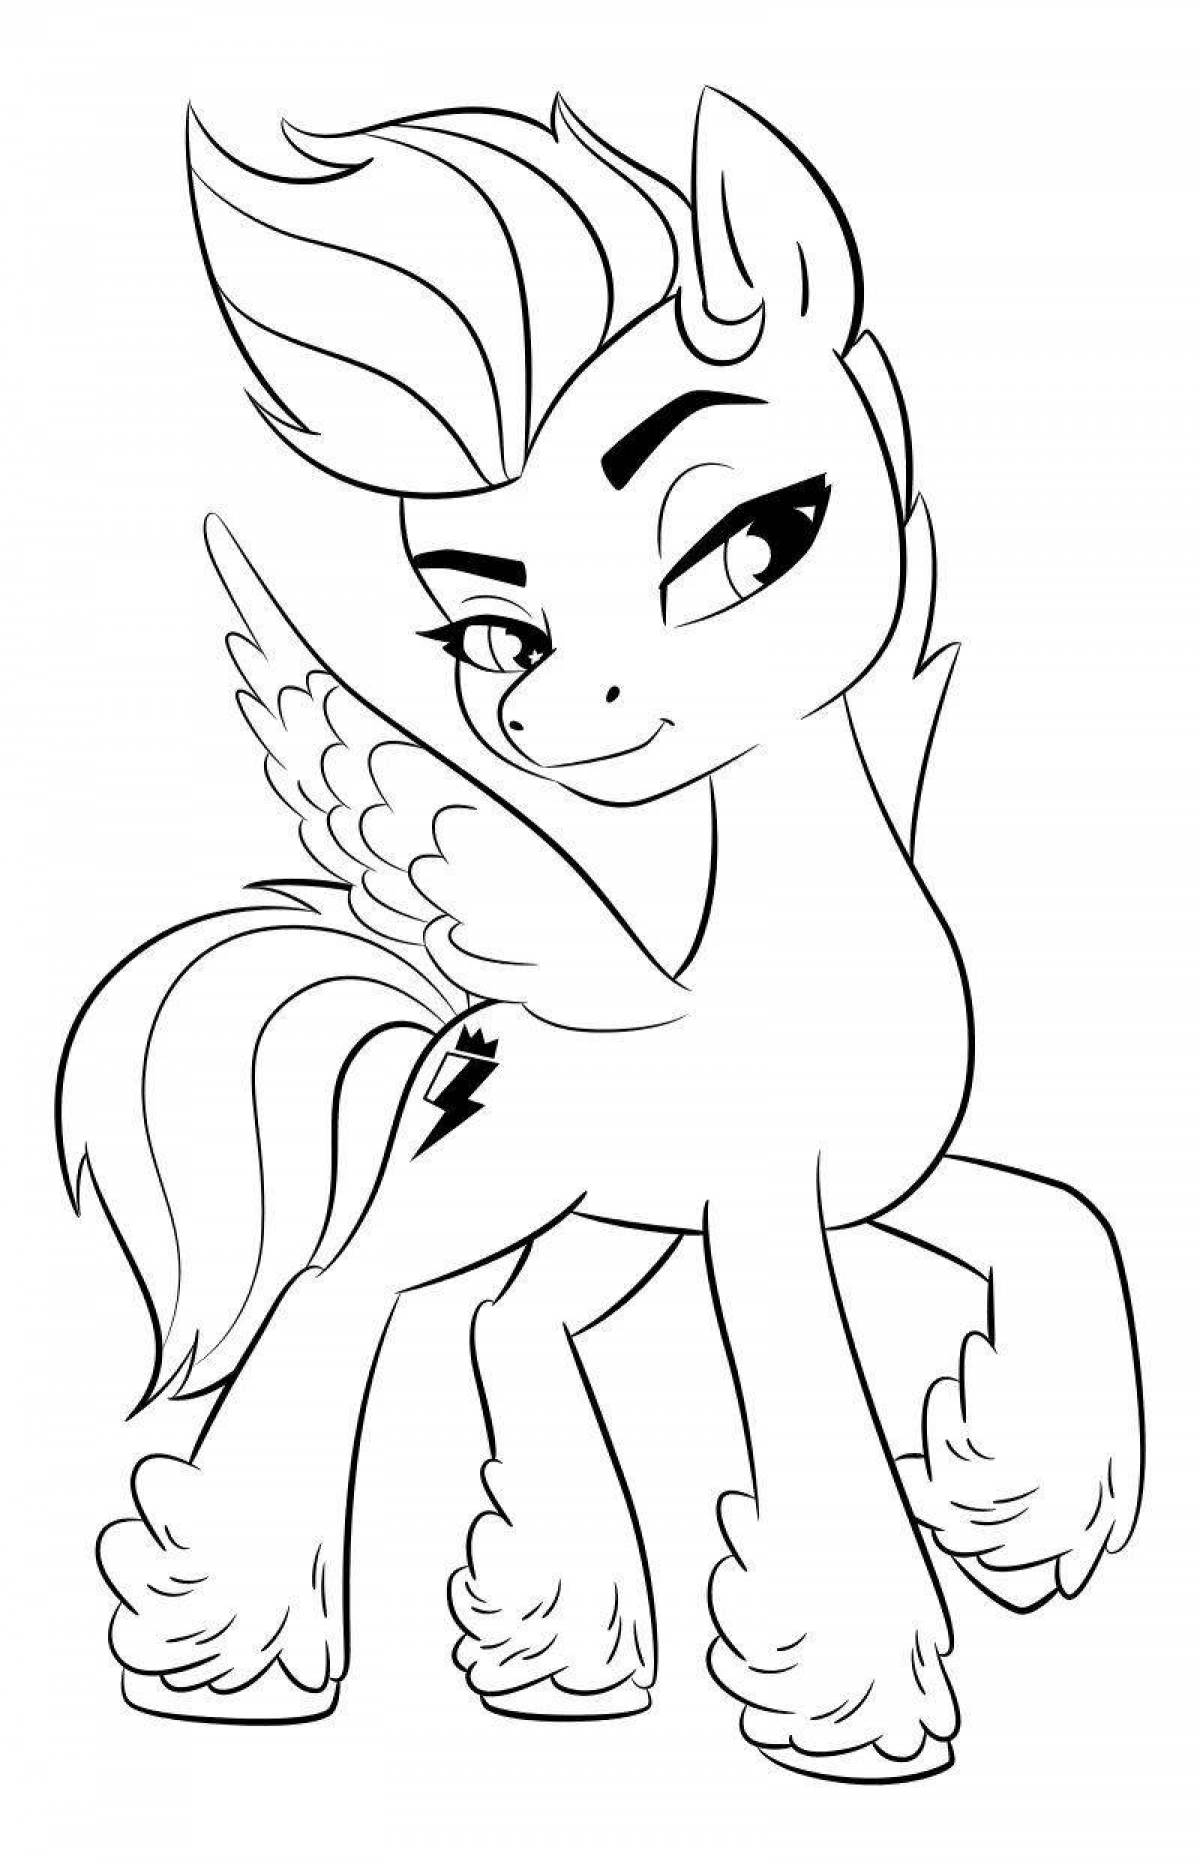 Sunny exotic pony coloring book